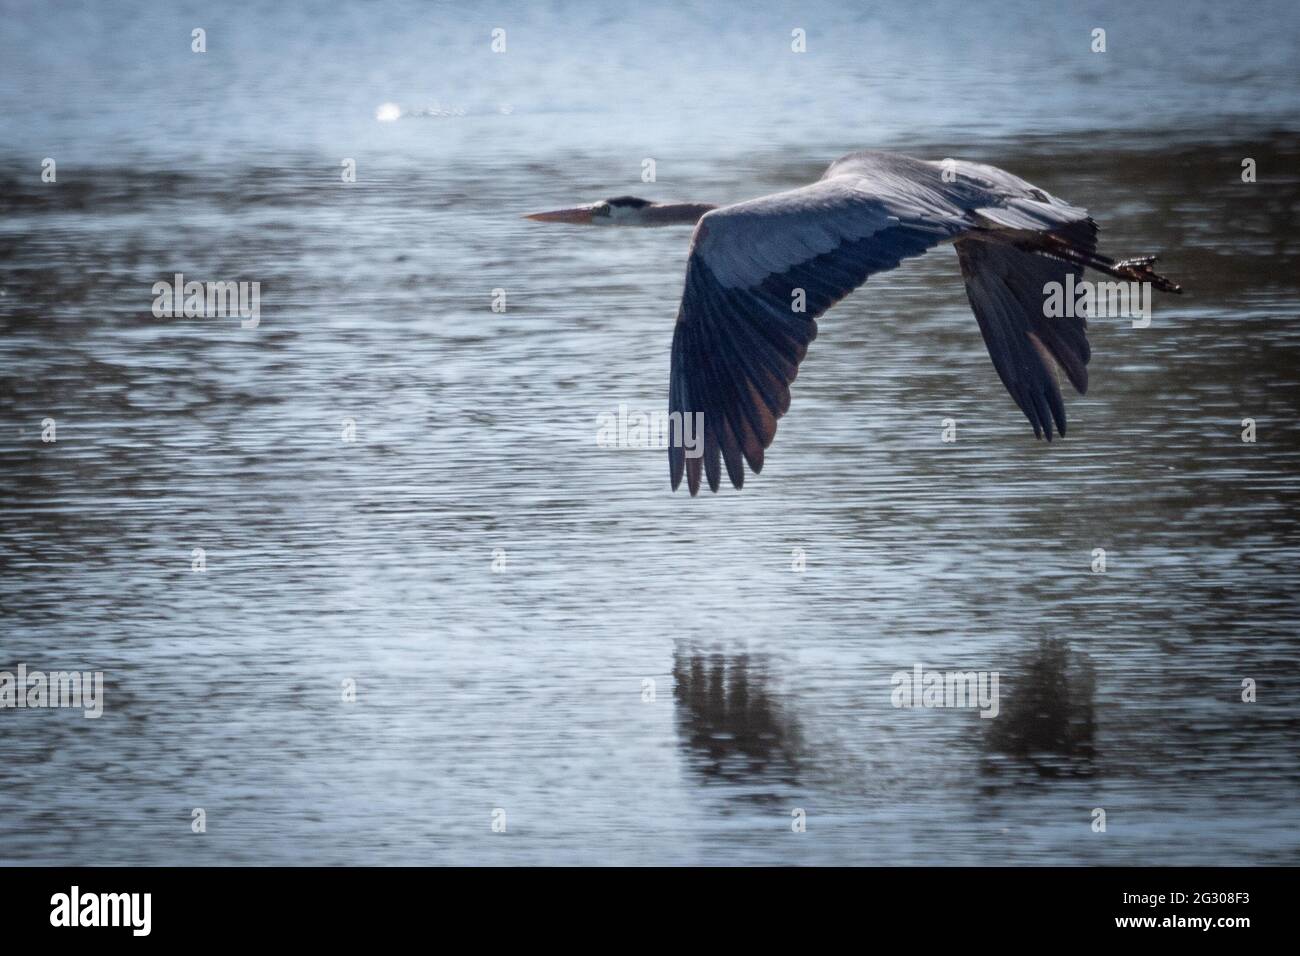 A single great blue heron takes flight over a pond in Kachina Village south of Flagstaff, Arizona. Stock Photo